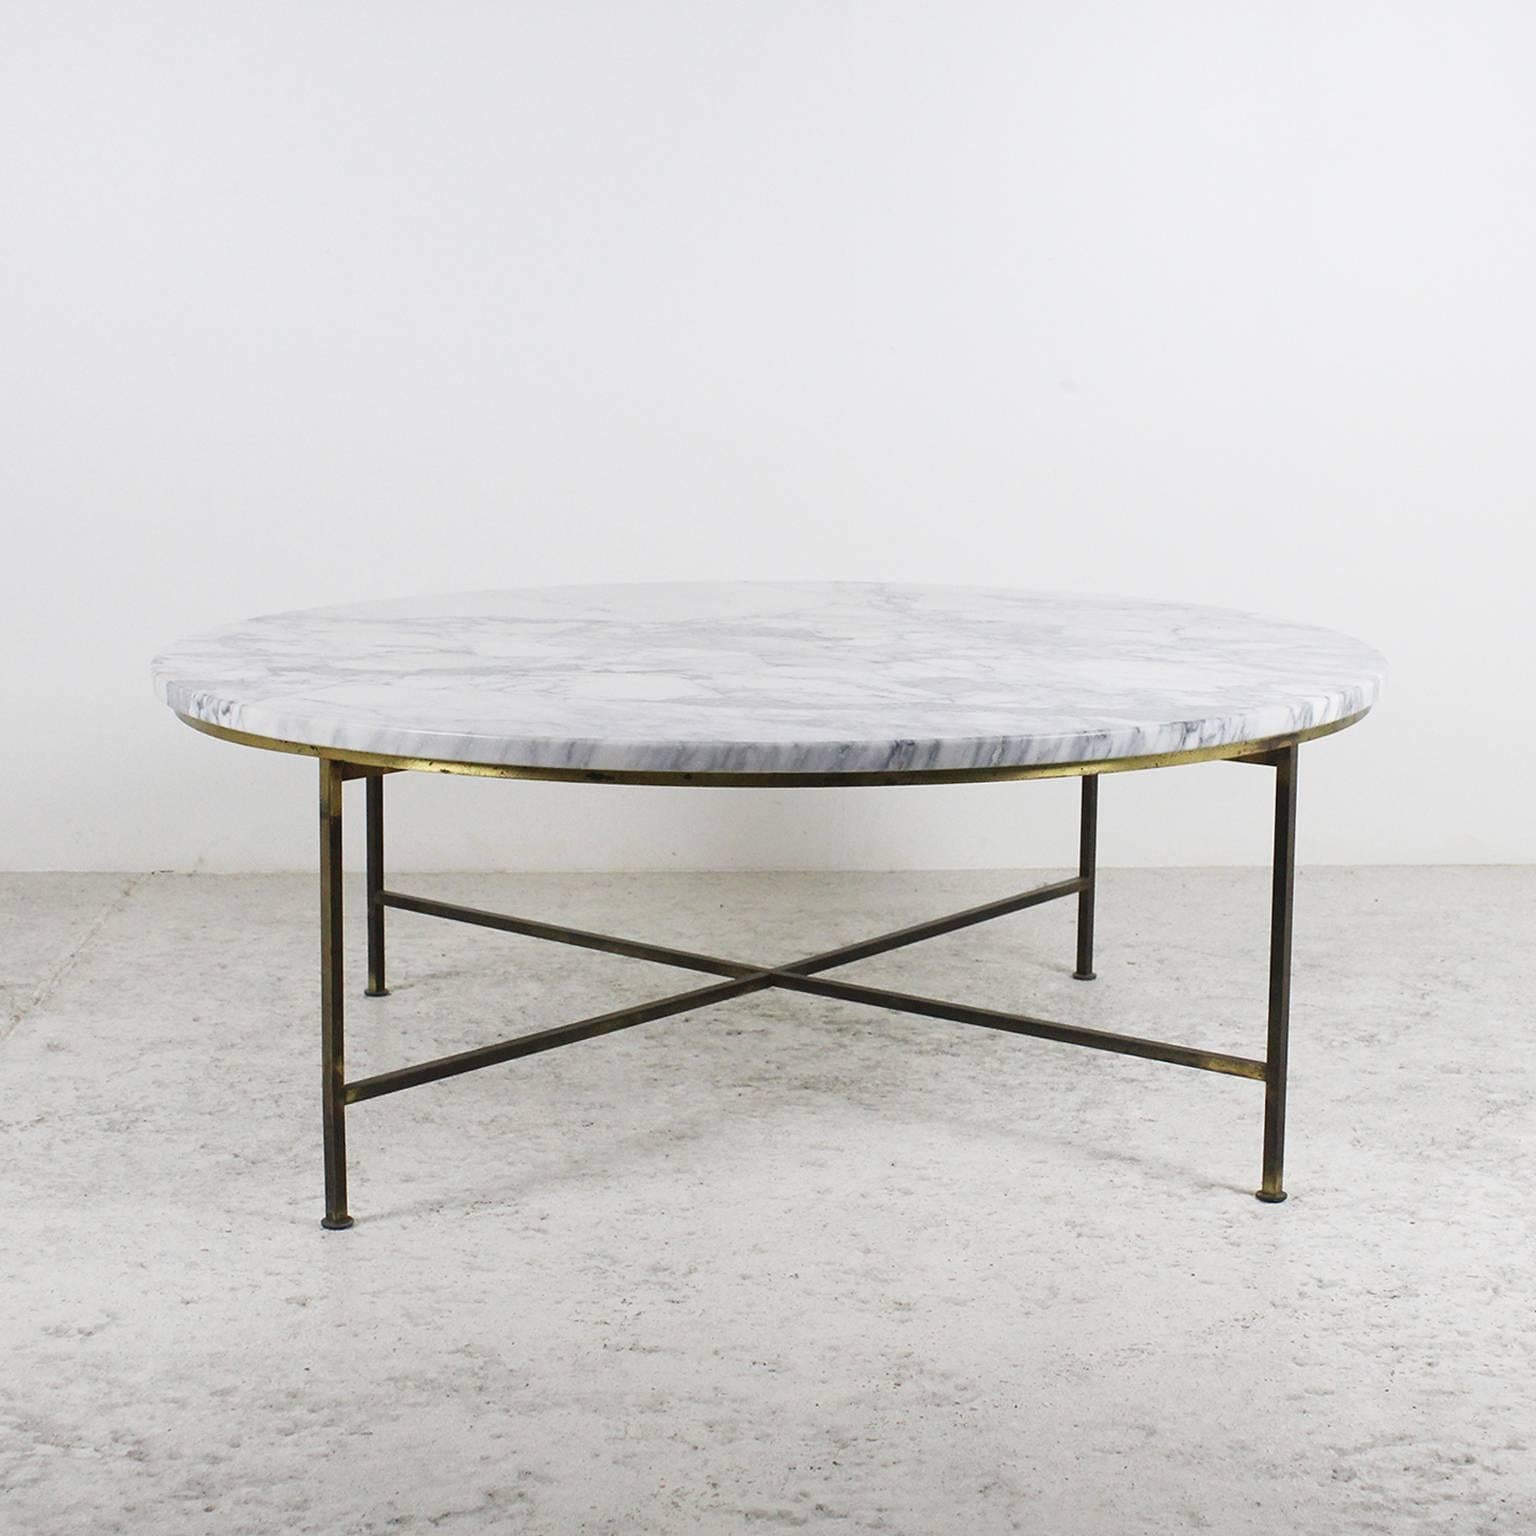 1954 round coffee table by Paul McCobb, manufactured by Directional. 
Marble top, frame in golden brass. 
Similar model in: LINDBECK Jennifer, "1950s furniture by Paul McCobb: Directional Designs," ed. Schiffer Book, USA.

Measures: